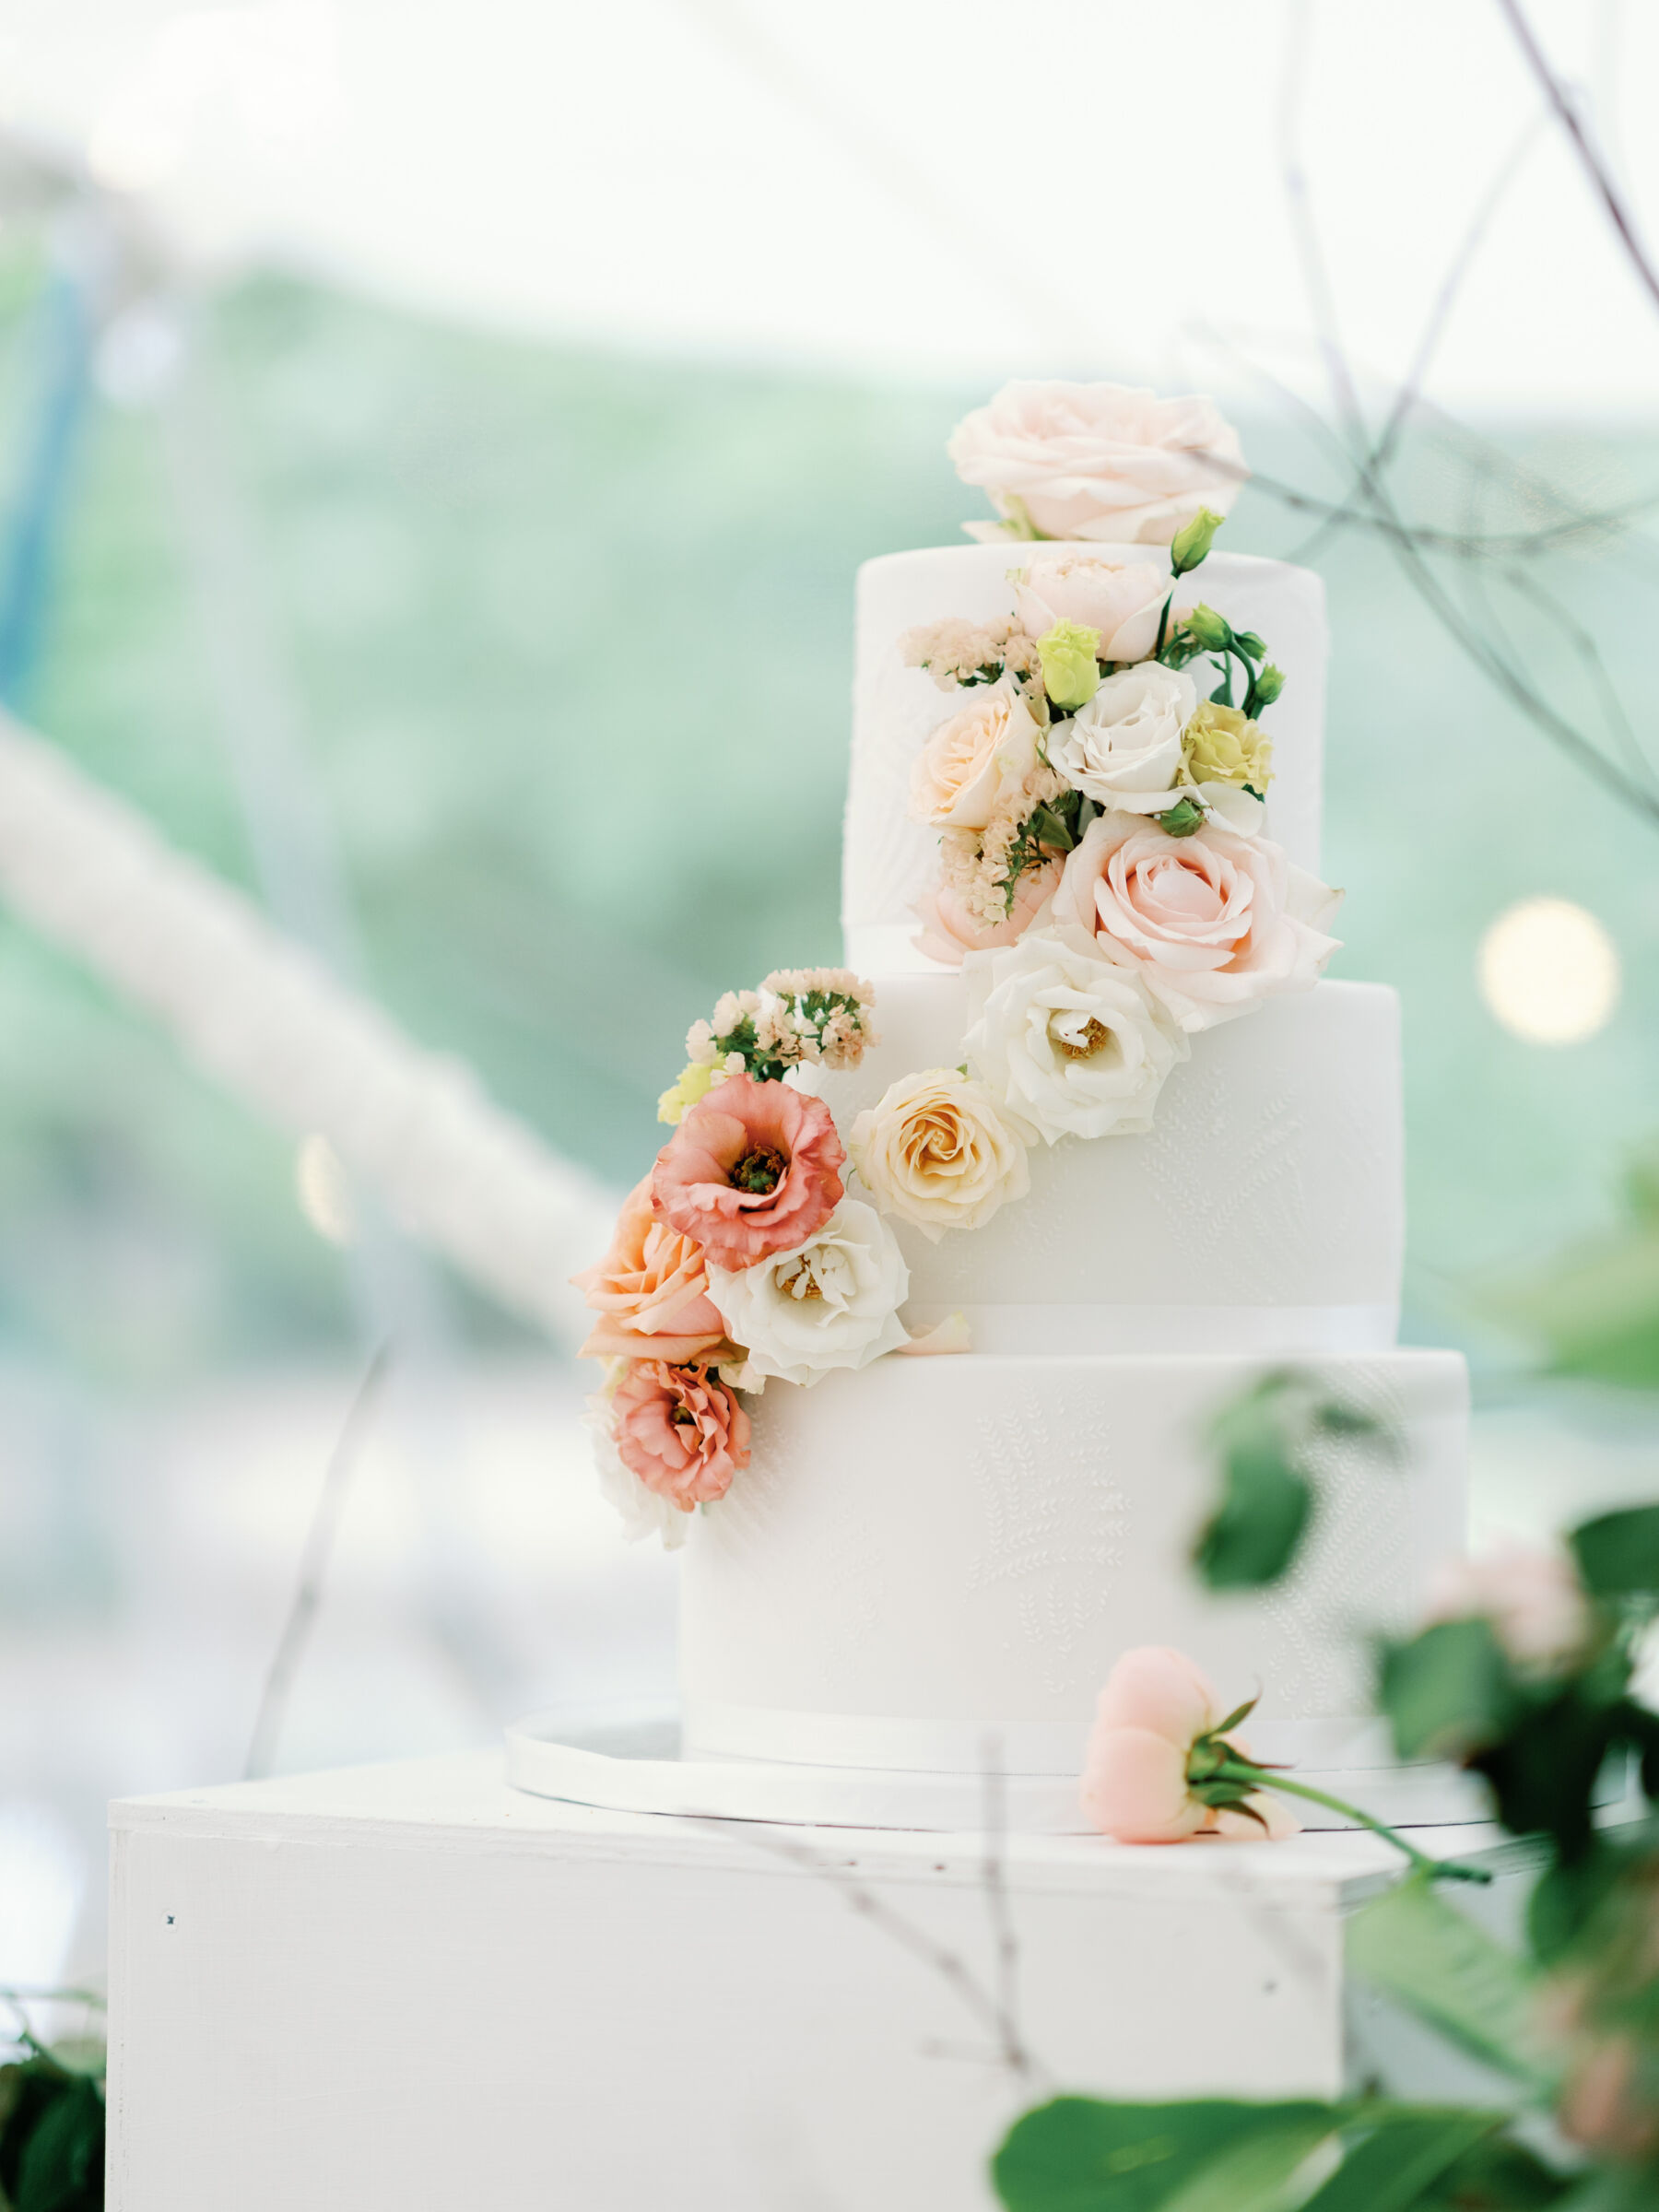 3 tier wedding cake with cascading peach and white flowers.